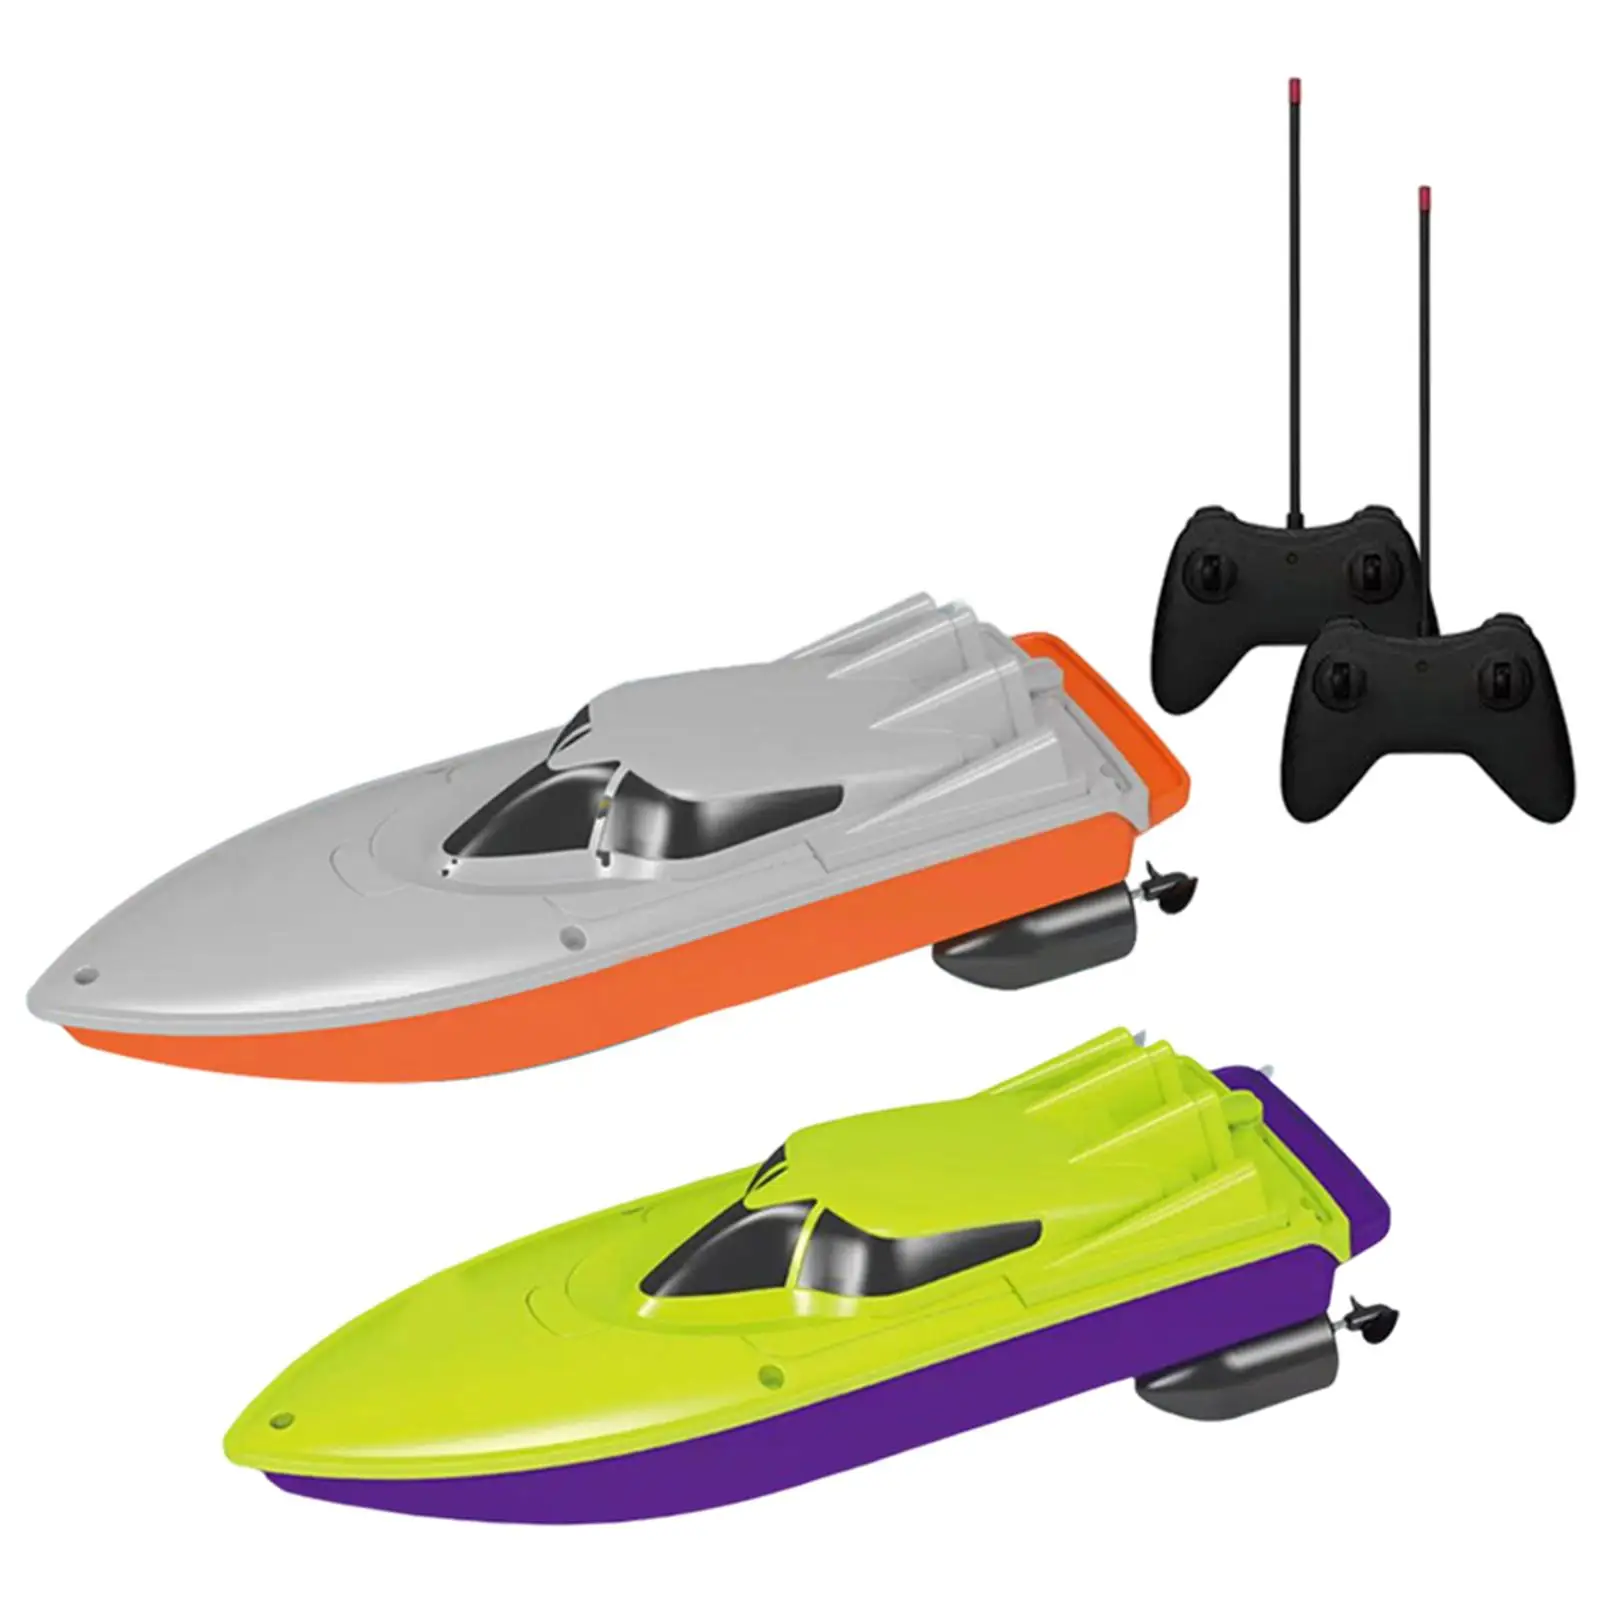 2.4G RC Boat Fast RC Race Boat 10+ MPH for Outdoor Sports Toy, Pools, River,